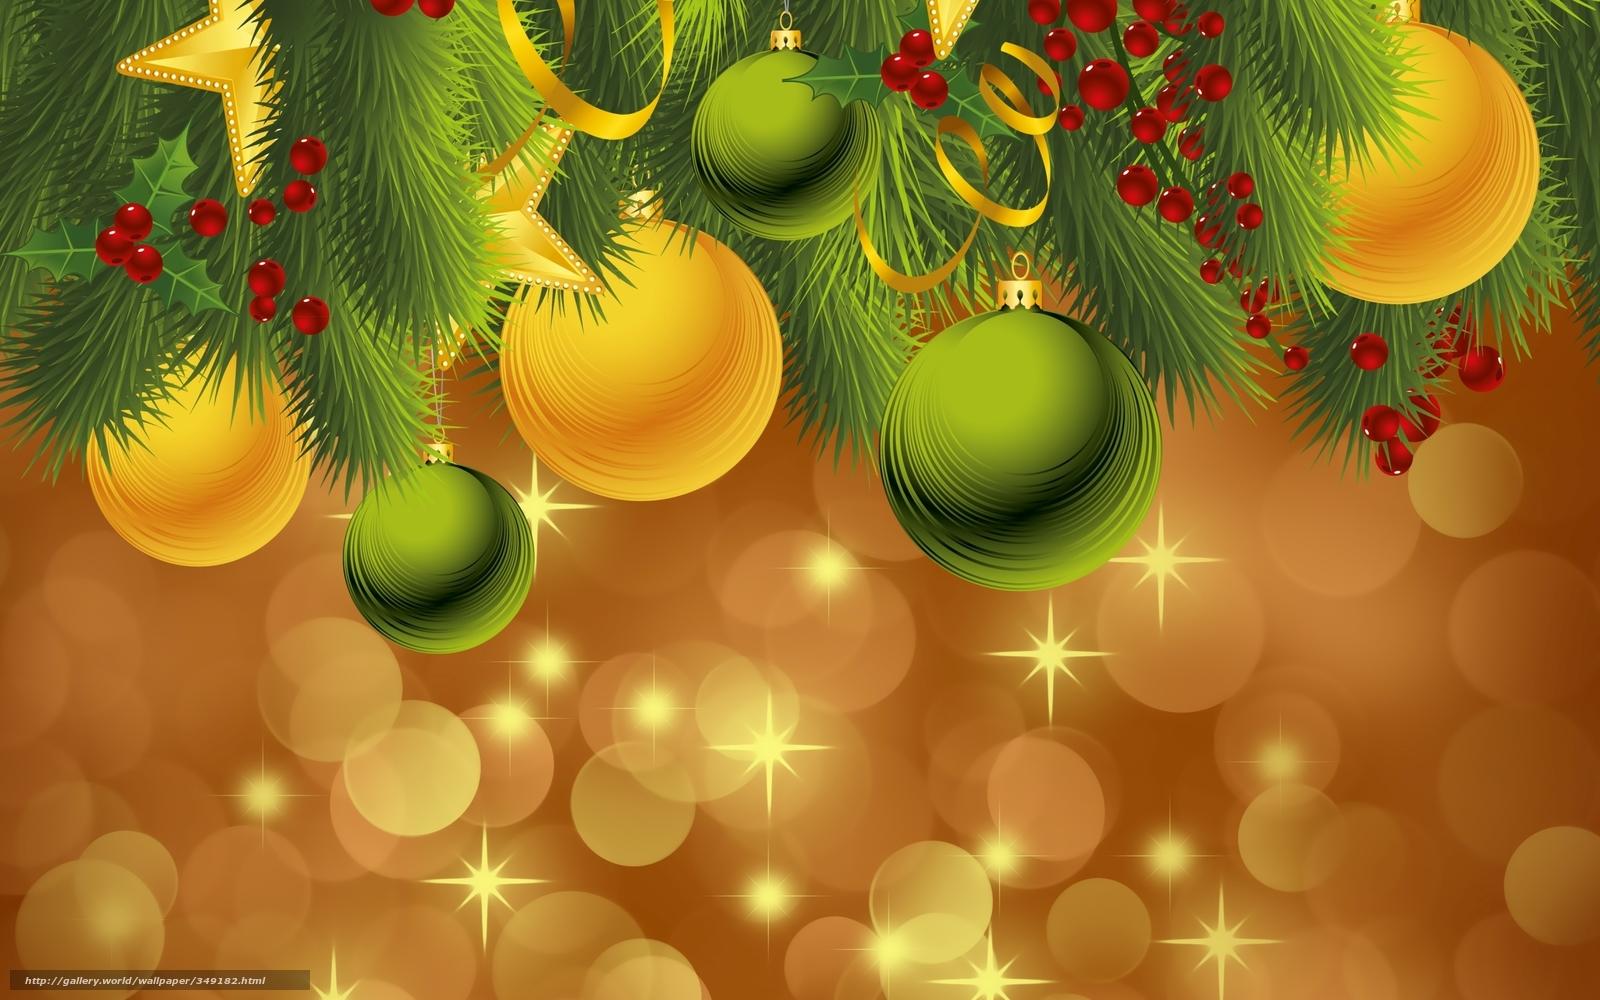 Holiday Scenery Wallpapers - Top Free Holiday Scenery Backgrounds ...